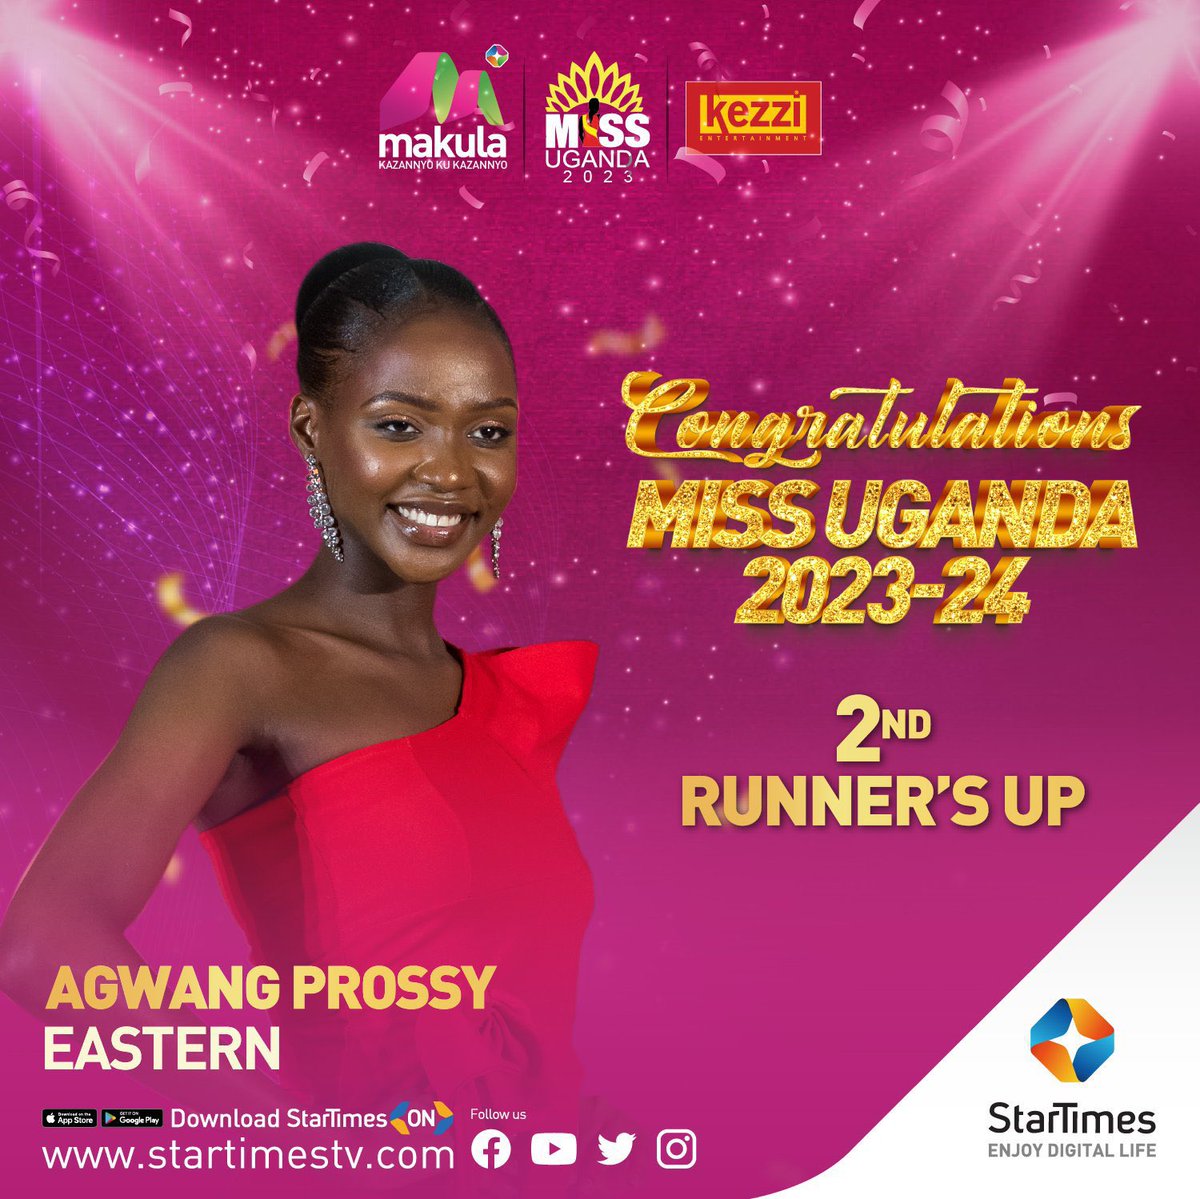 Our beautiful Angels who took the top three positions of #MissUganda2023

🥇 Miss Hannah Karema Tumukunde - Miss Uganda 2023.

🥈 Miss Whitney Martha Ademun - First Runner up.

🥉 Miss Agwang Prossy - Second runner up.

Special thanks to everyone who played any role in this .